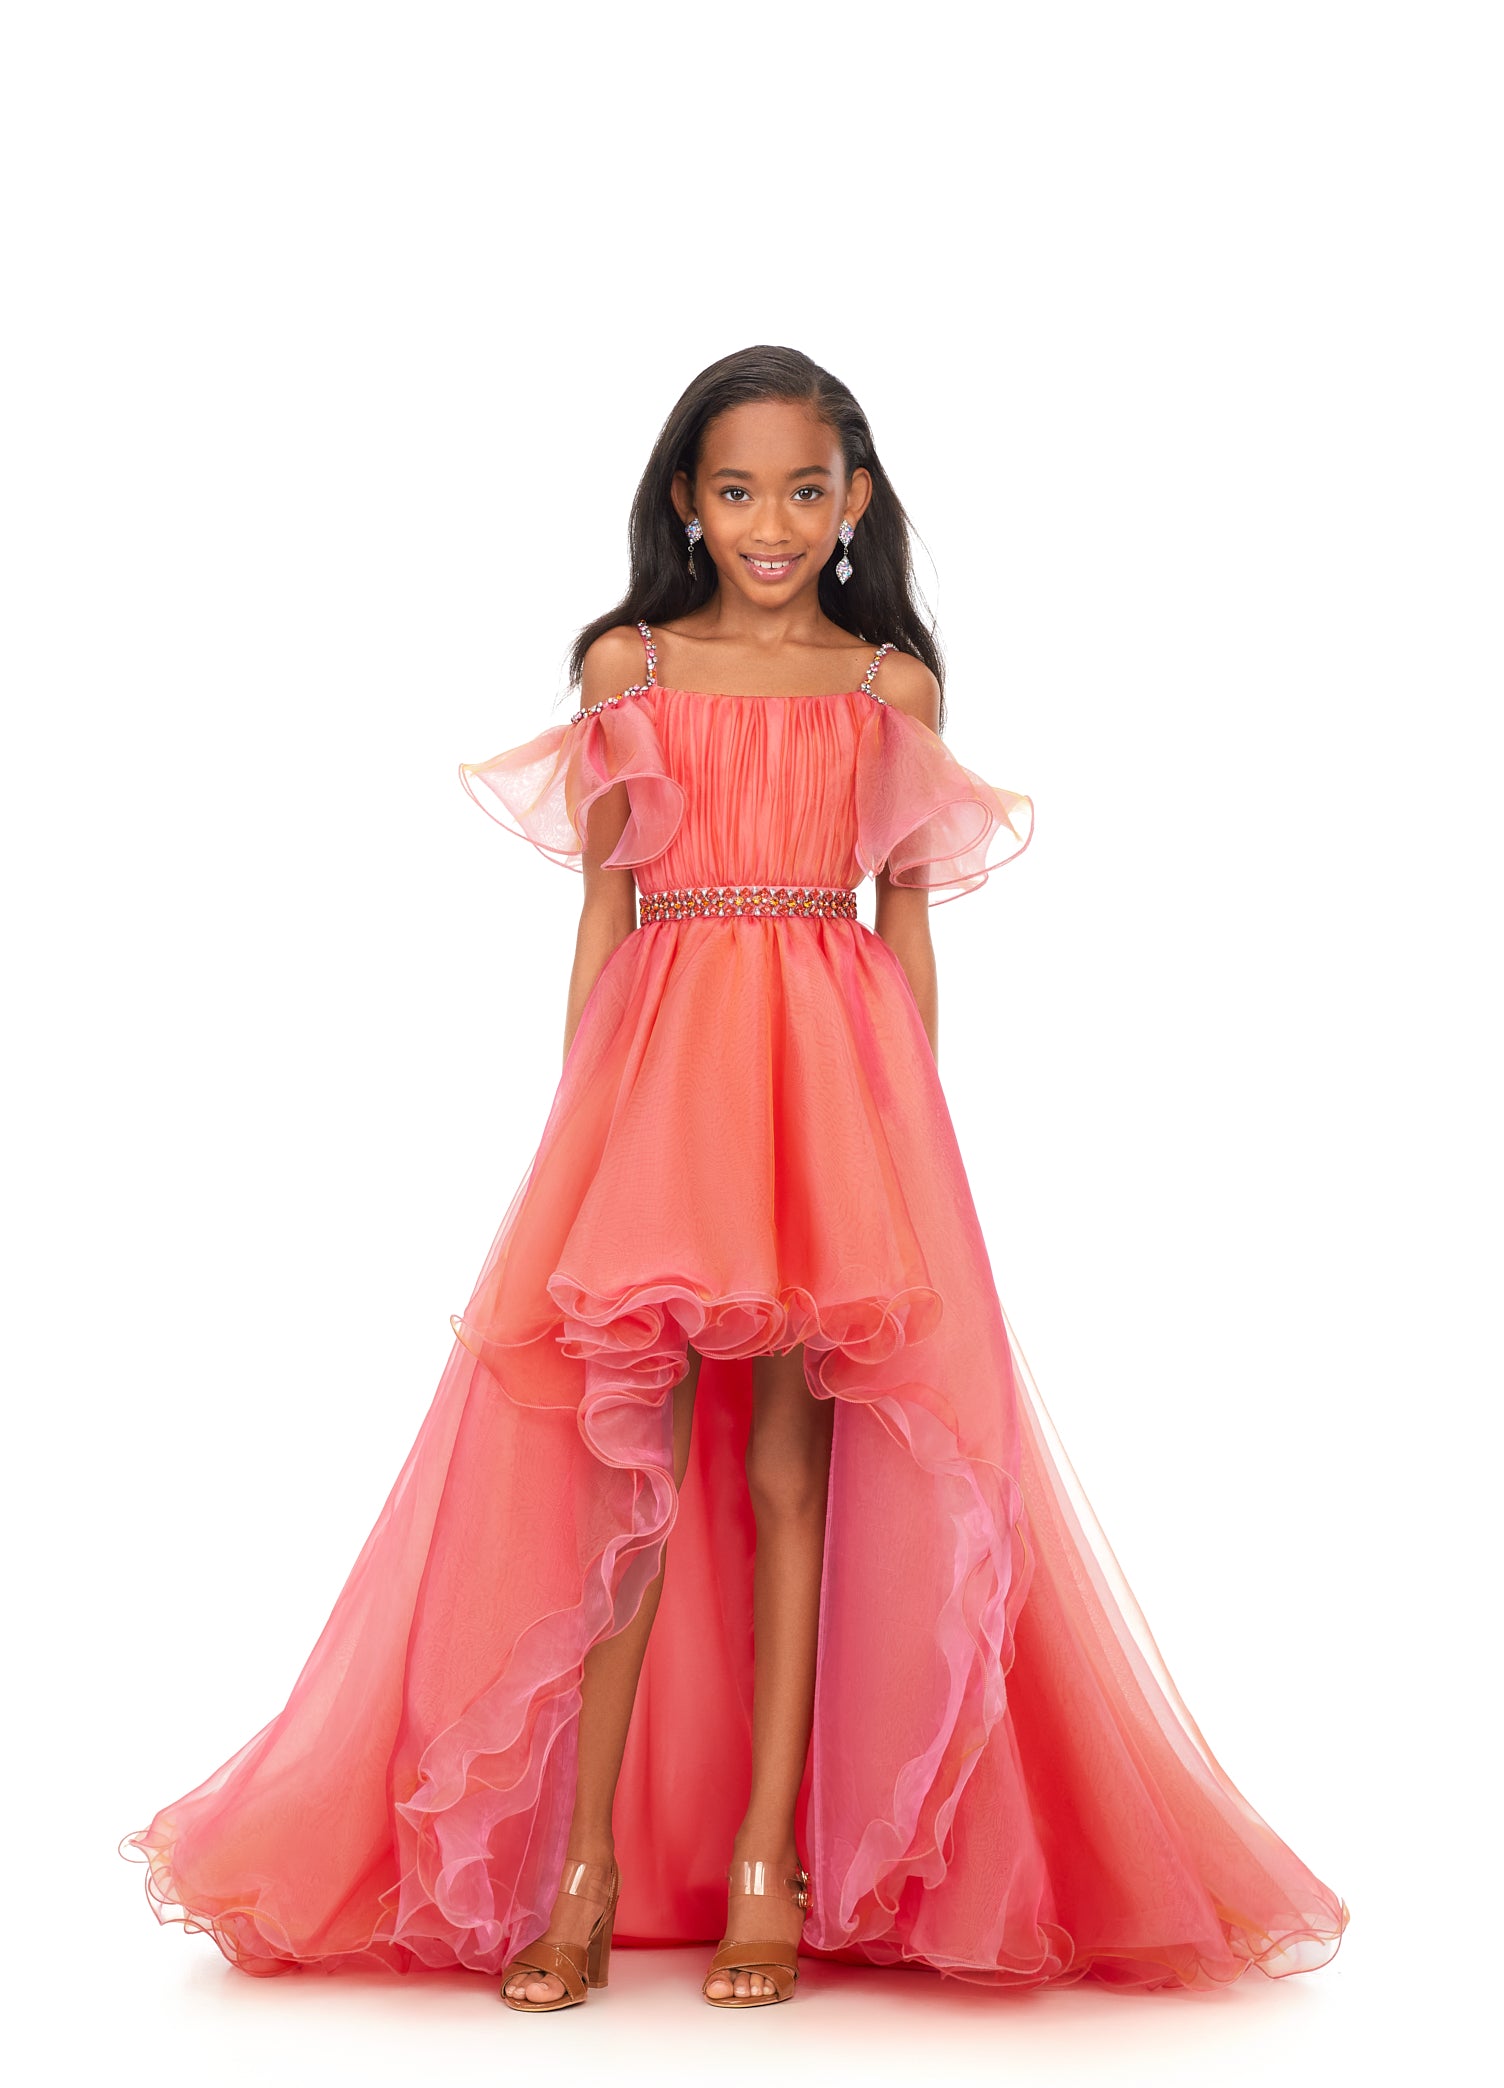 Wine Red Plumetis Tulle Princess Gown For Flower Girls Perfect For  Weddings, Birthdays, First Communion And Parties From Bridelee, $57.16 |  DHgate.Com